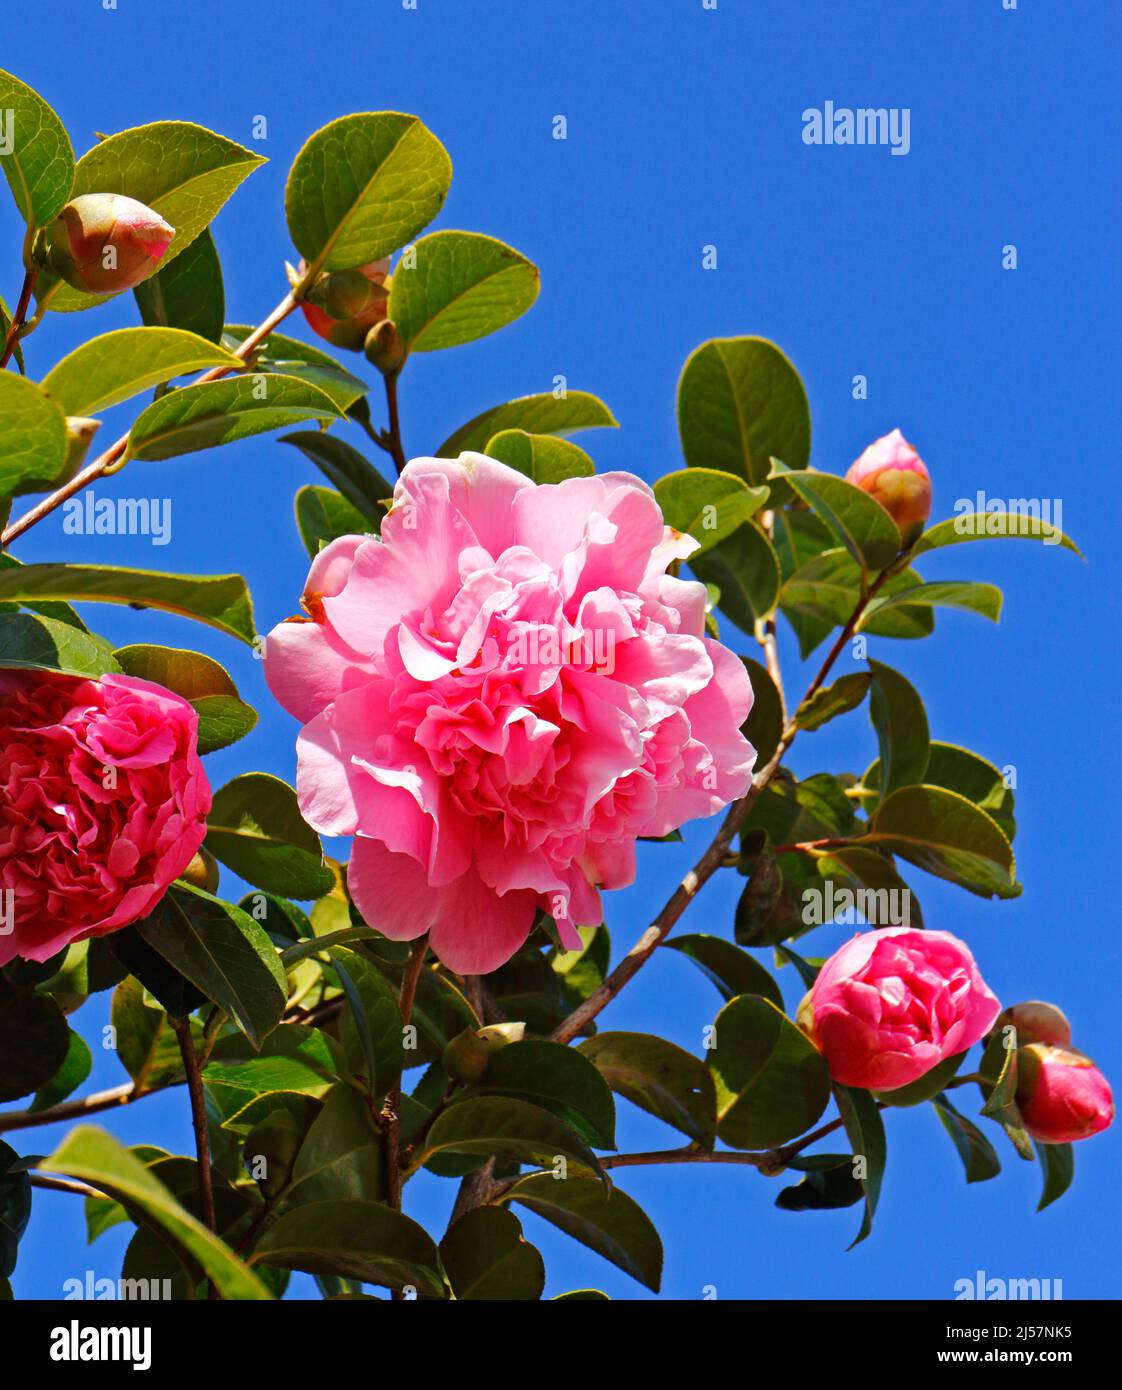 A flowering bloom of Camellia x williamsii in early spring against a clear blue sky in an urban garden at Hellesdon, Norfolk, England, United Kingdom. Stock Photo